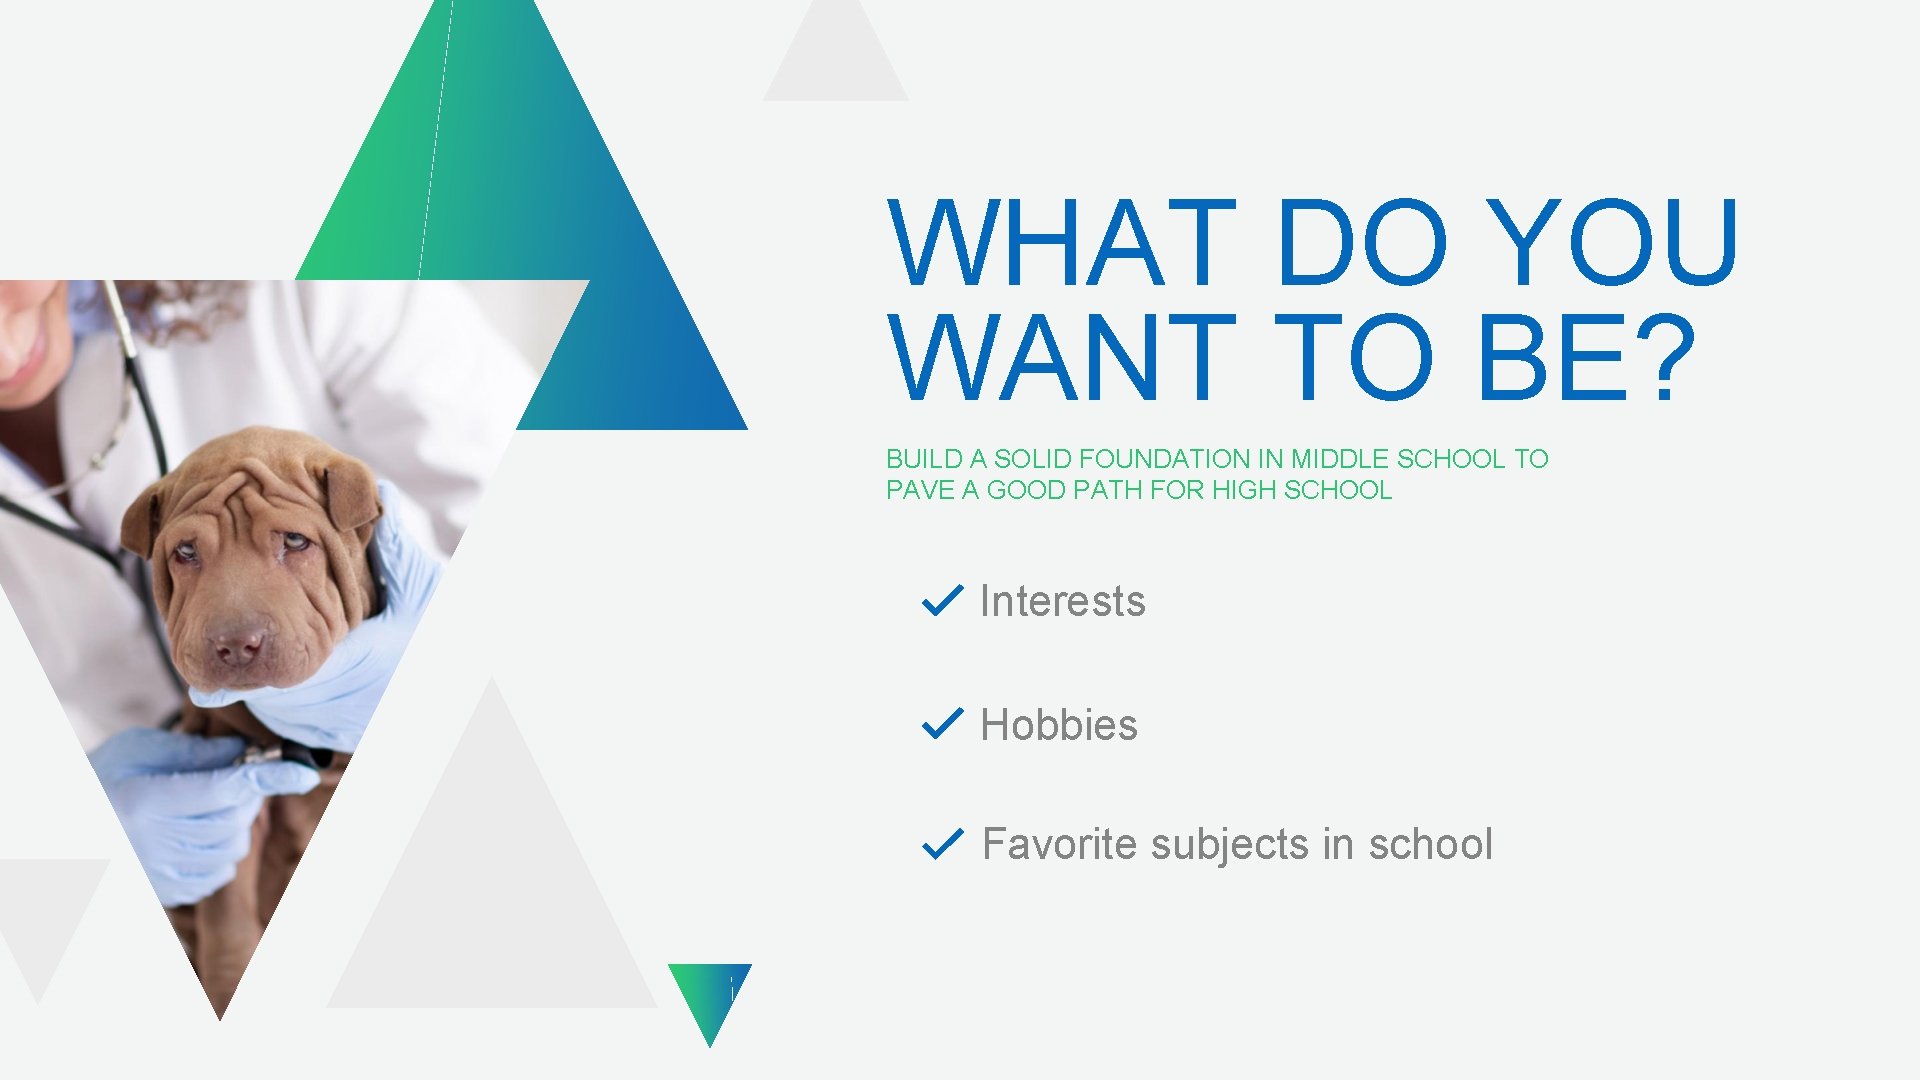 WHAT DO YOU WANT TO BE? BUILD A SOLID FOUNDATION IN MIDDLE SCHOOL TO